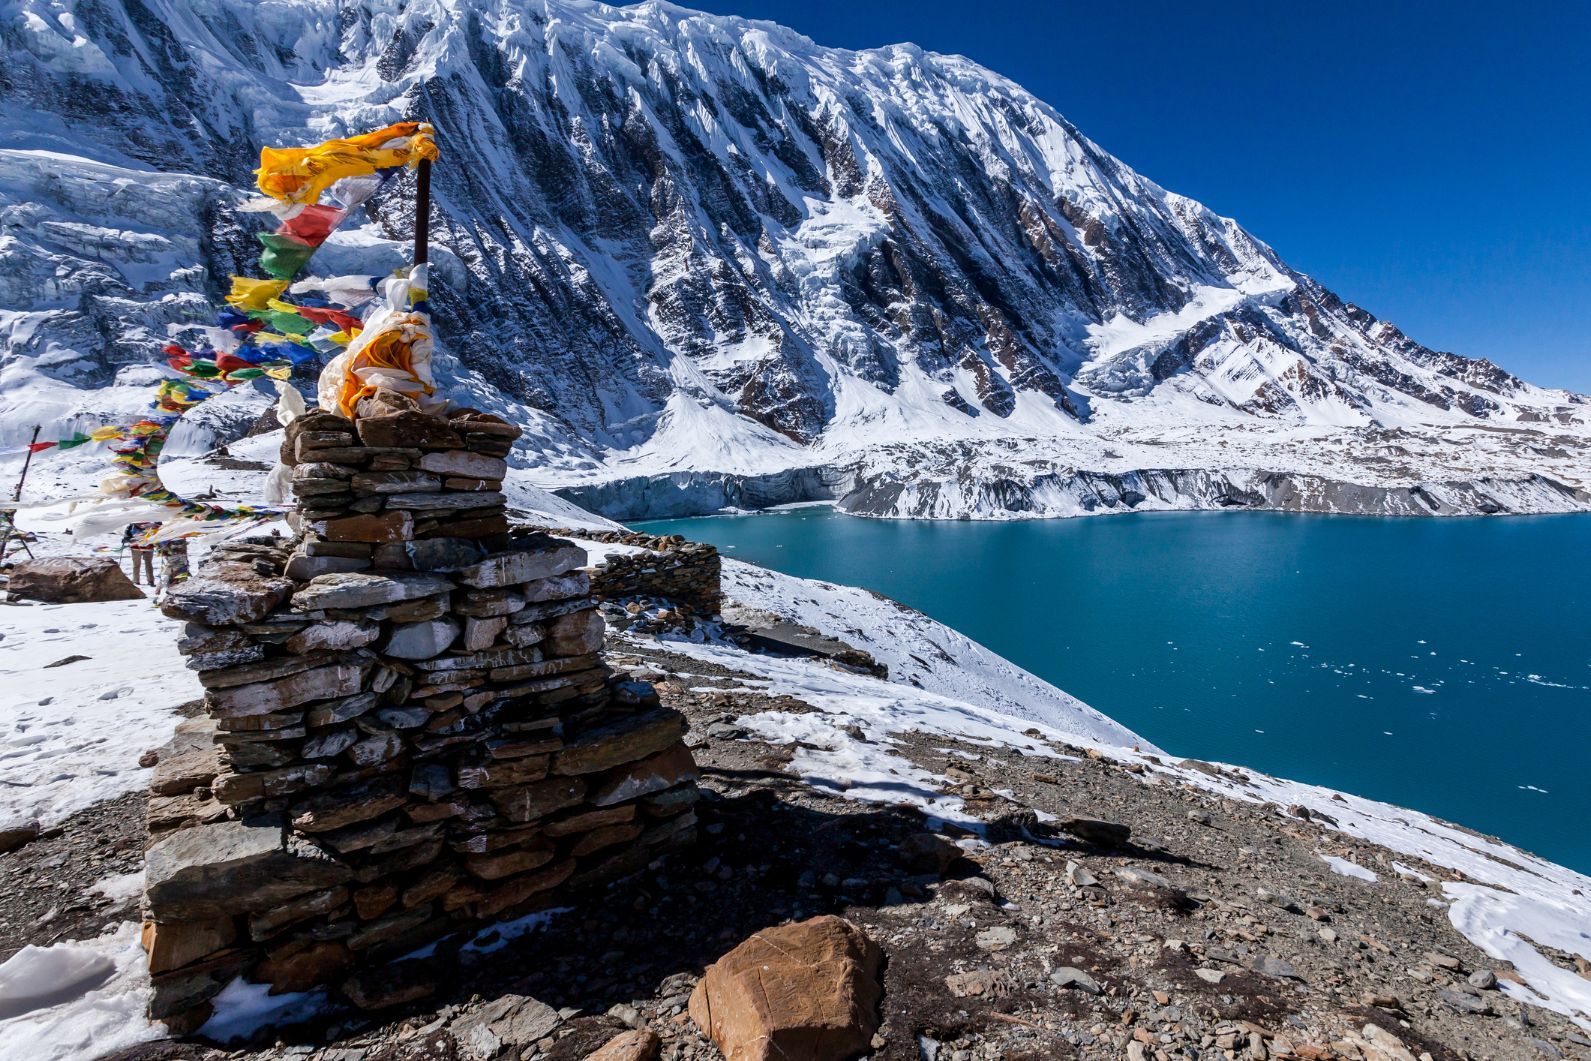 A stone stupa with prayer flags near Tilicho lake in the Annapurna Conservation Area.